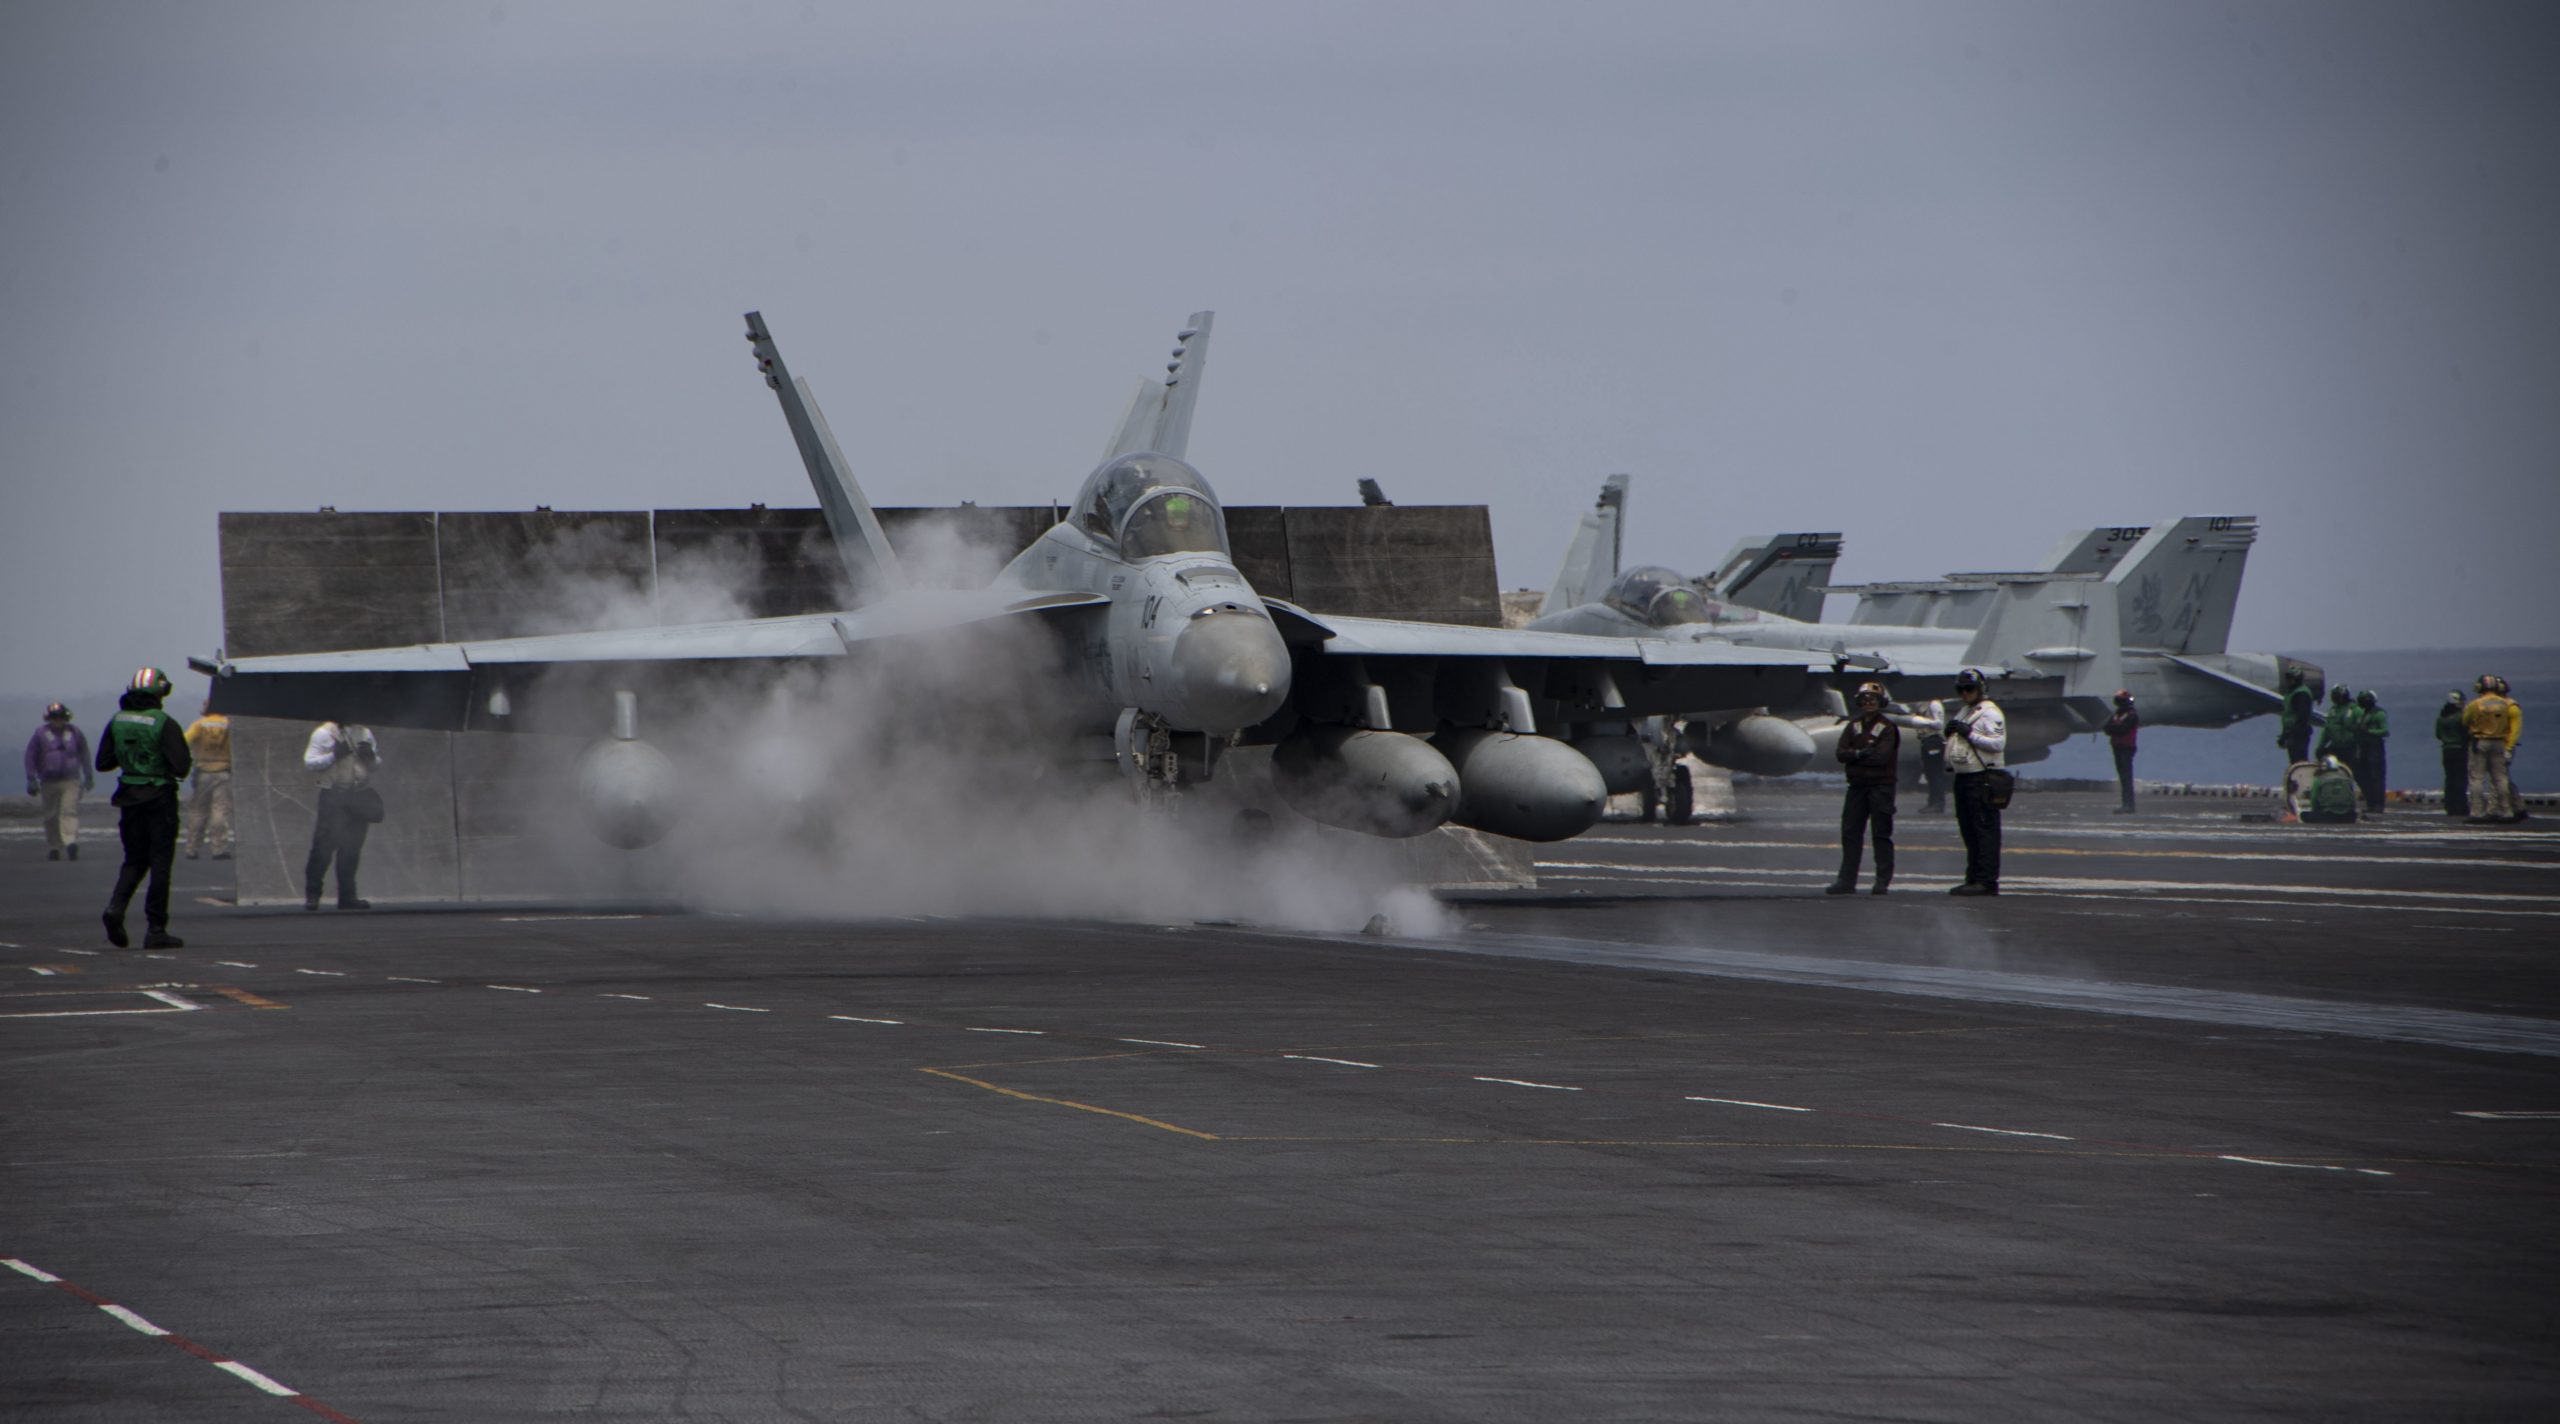 EA-18G Growler Vs The FA-18 Super Hornet, What Are The Differences?